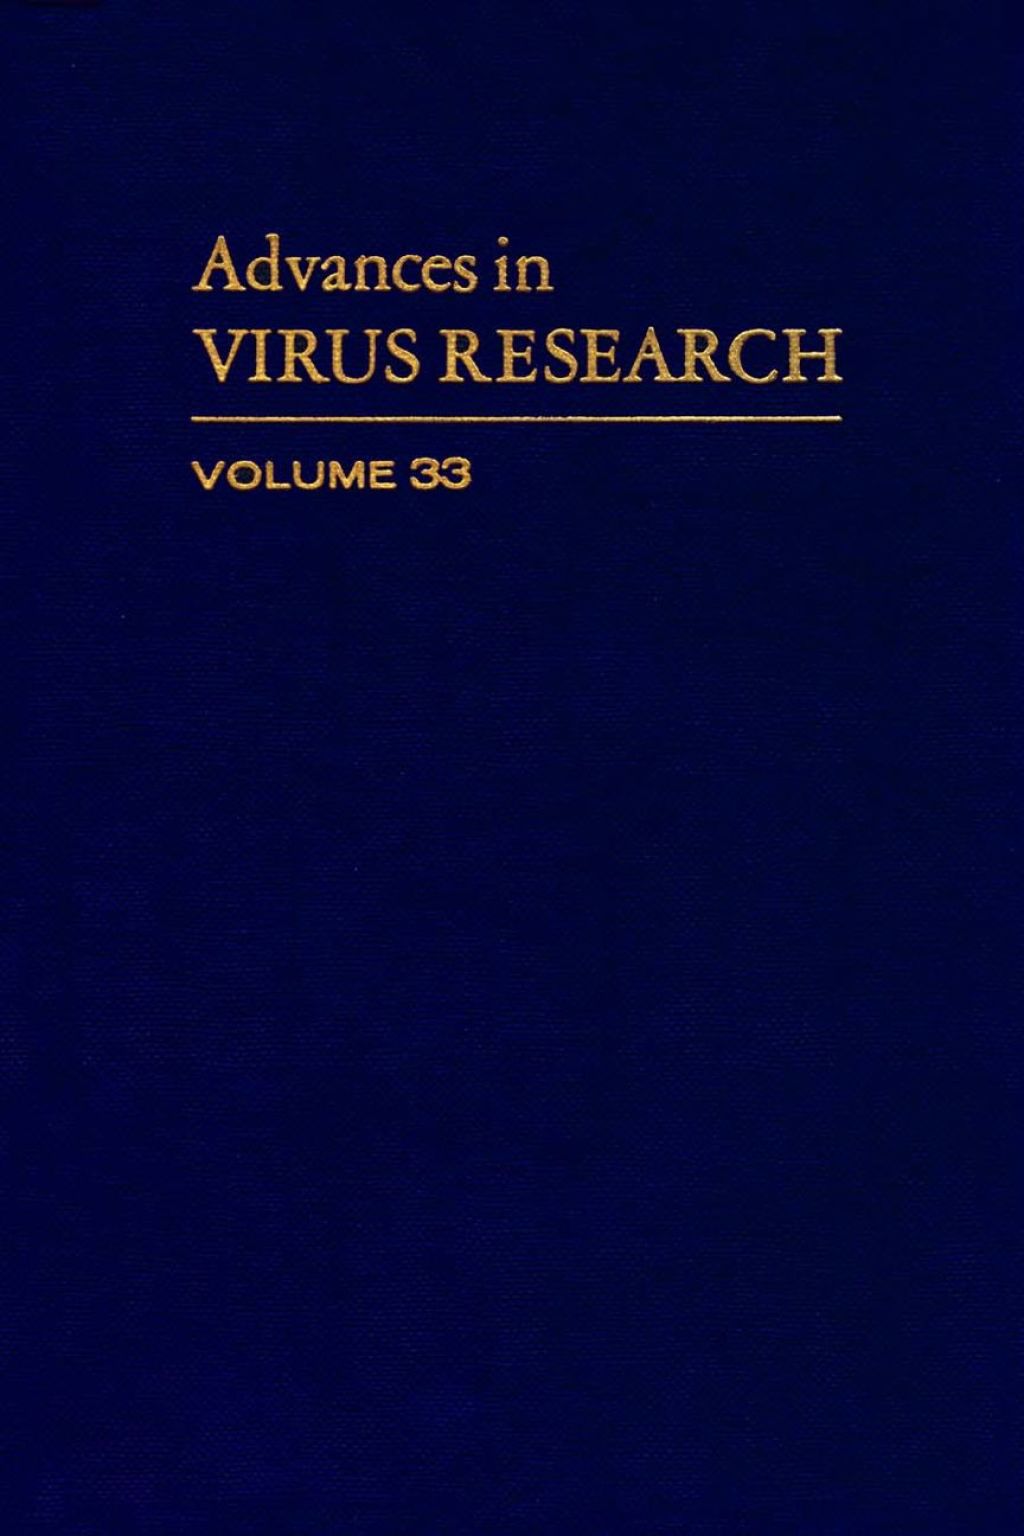 ADVANCES IN VIRUS RESEARCH VOL 33 (eBook) - AUTHOR;  UNKNOWN,